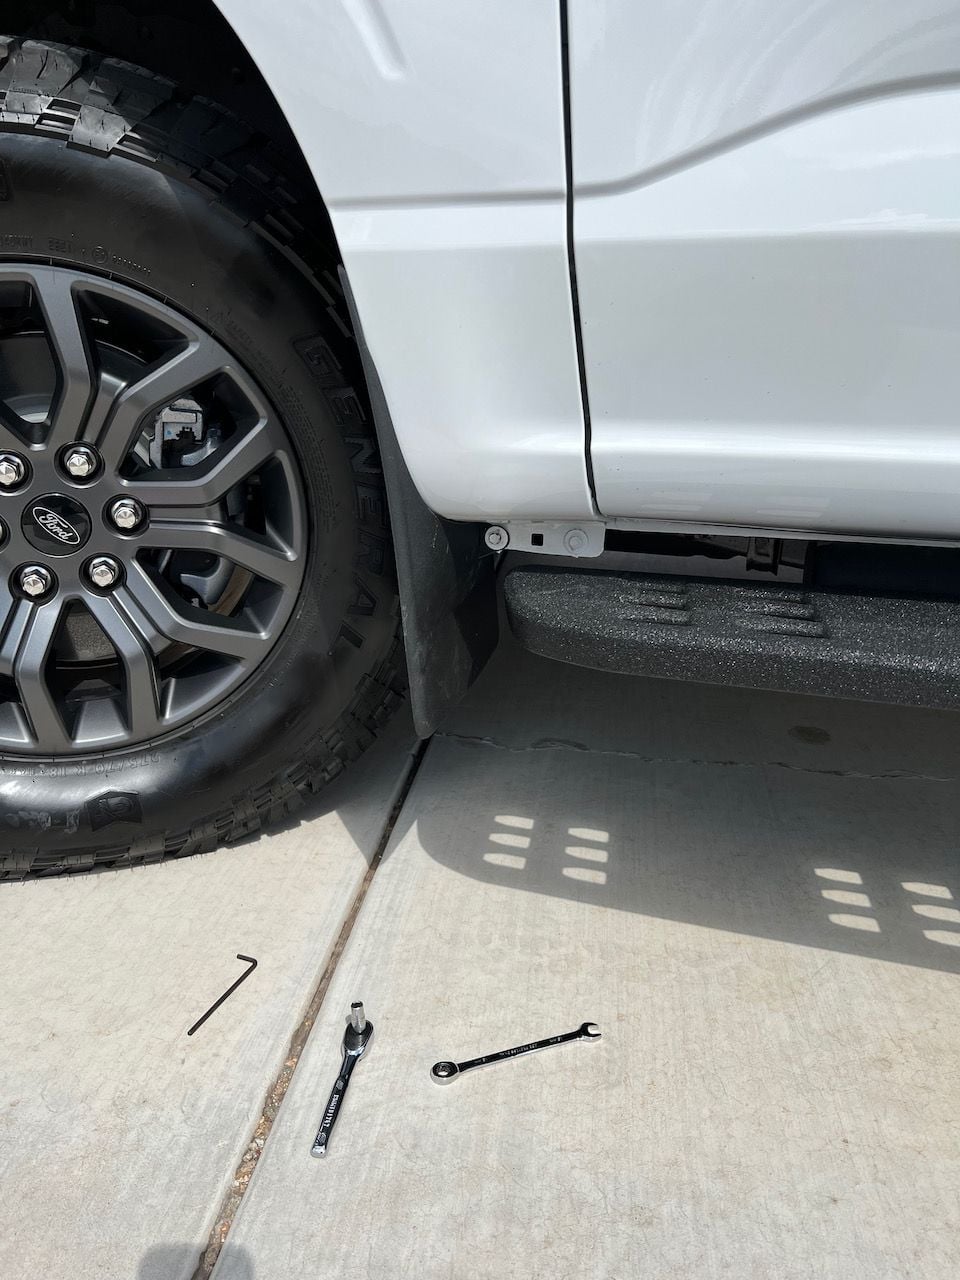 How to Install a No Drill Mud Flap: 13 Steps (with Pictures)